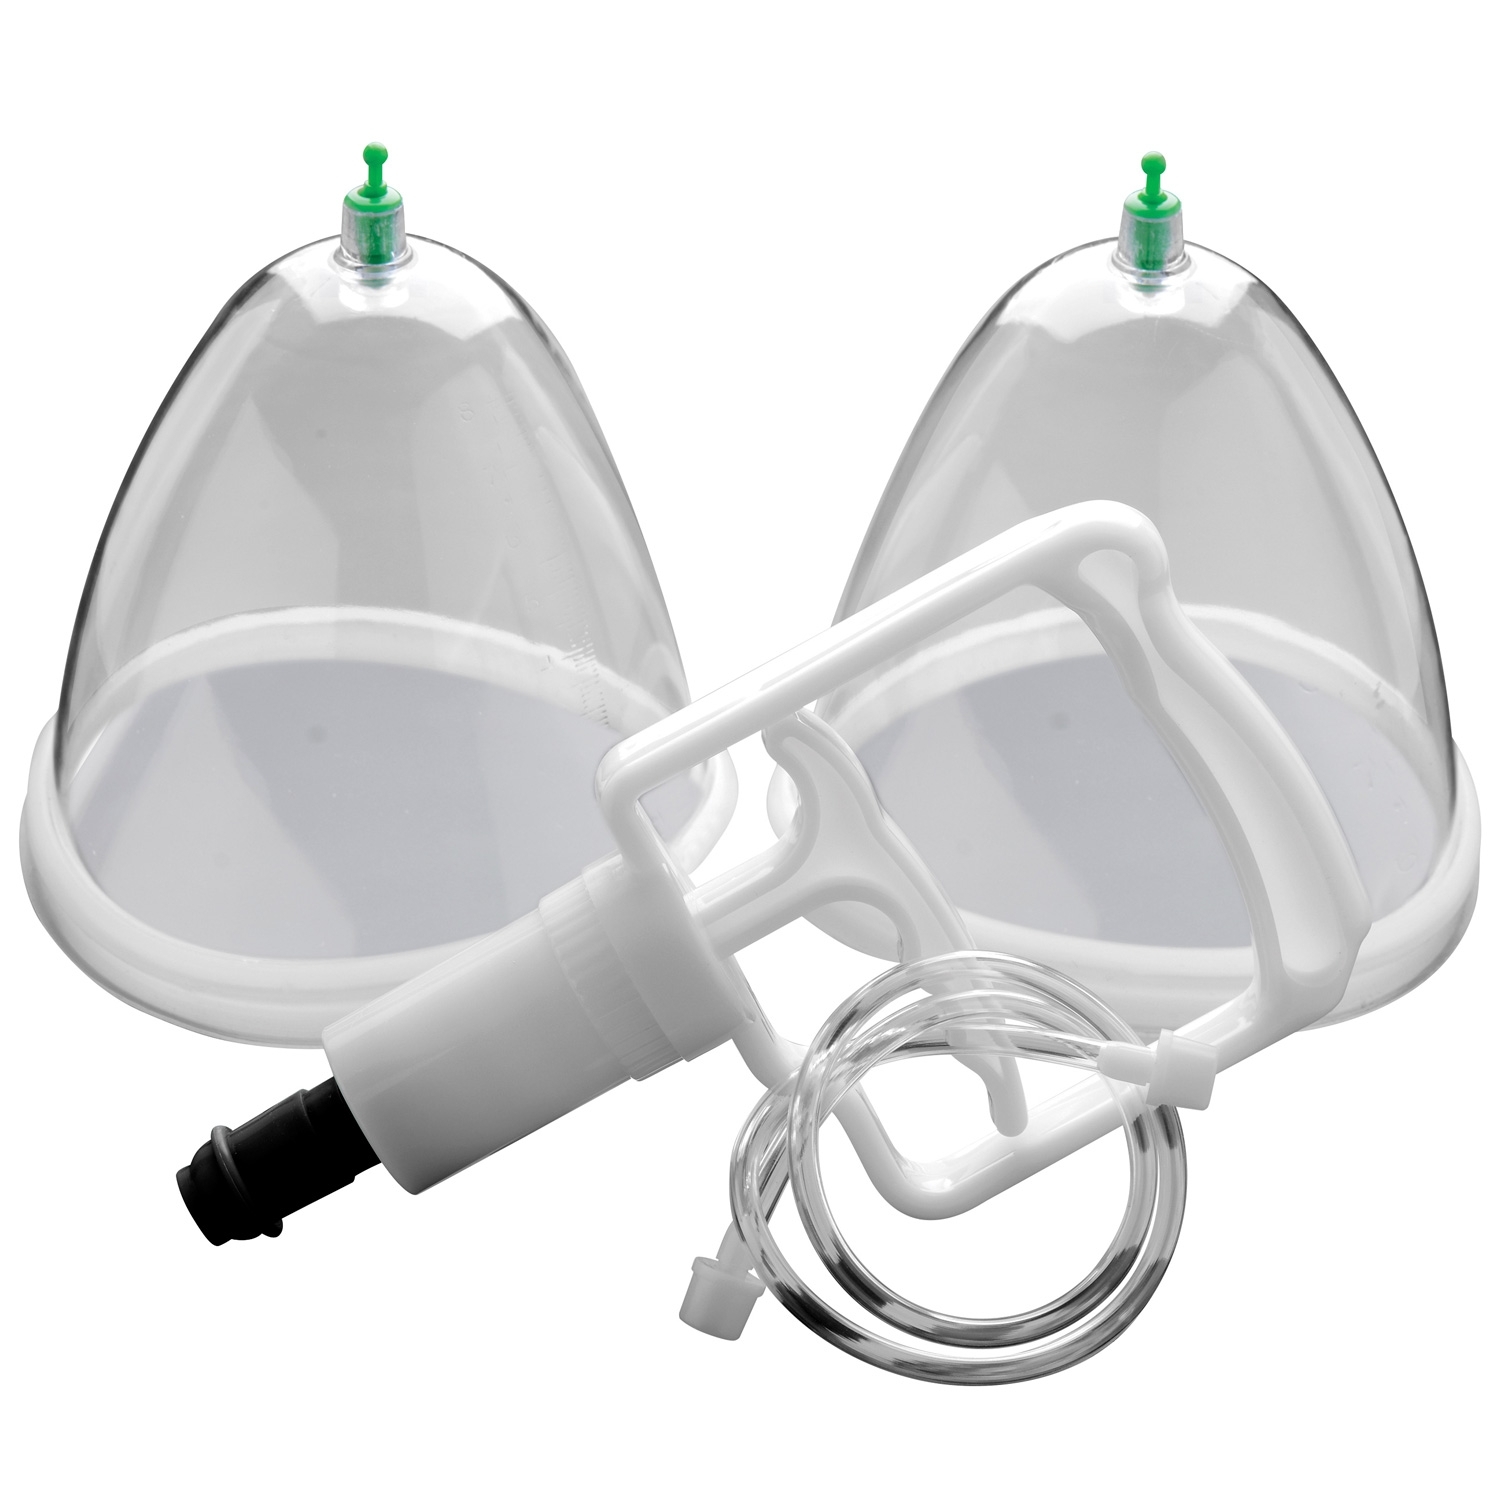 Size Matters Breast Cupping System - Klar thumbnail